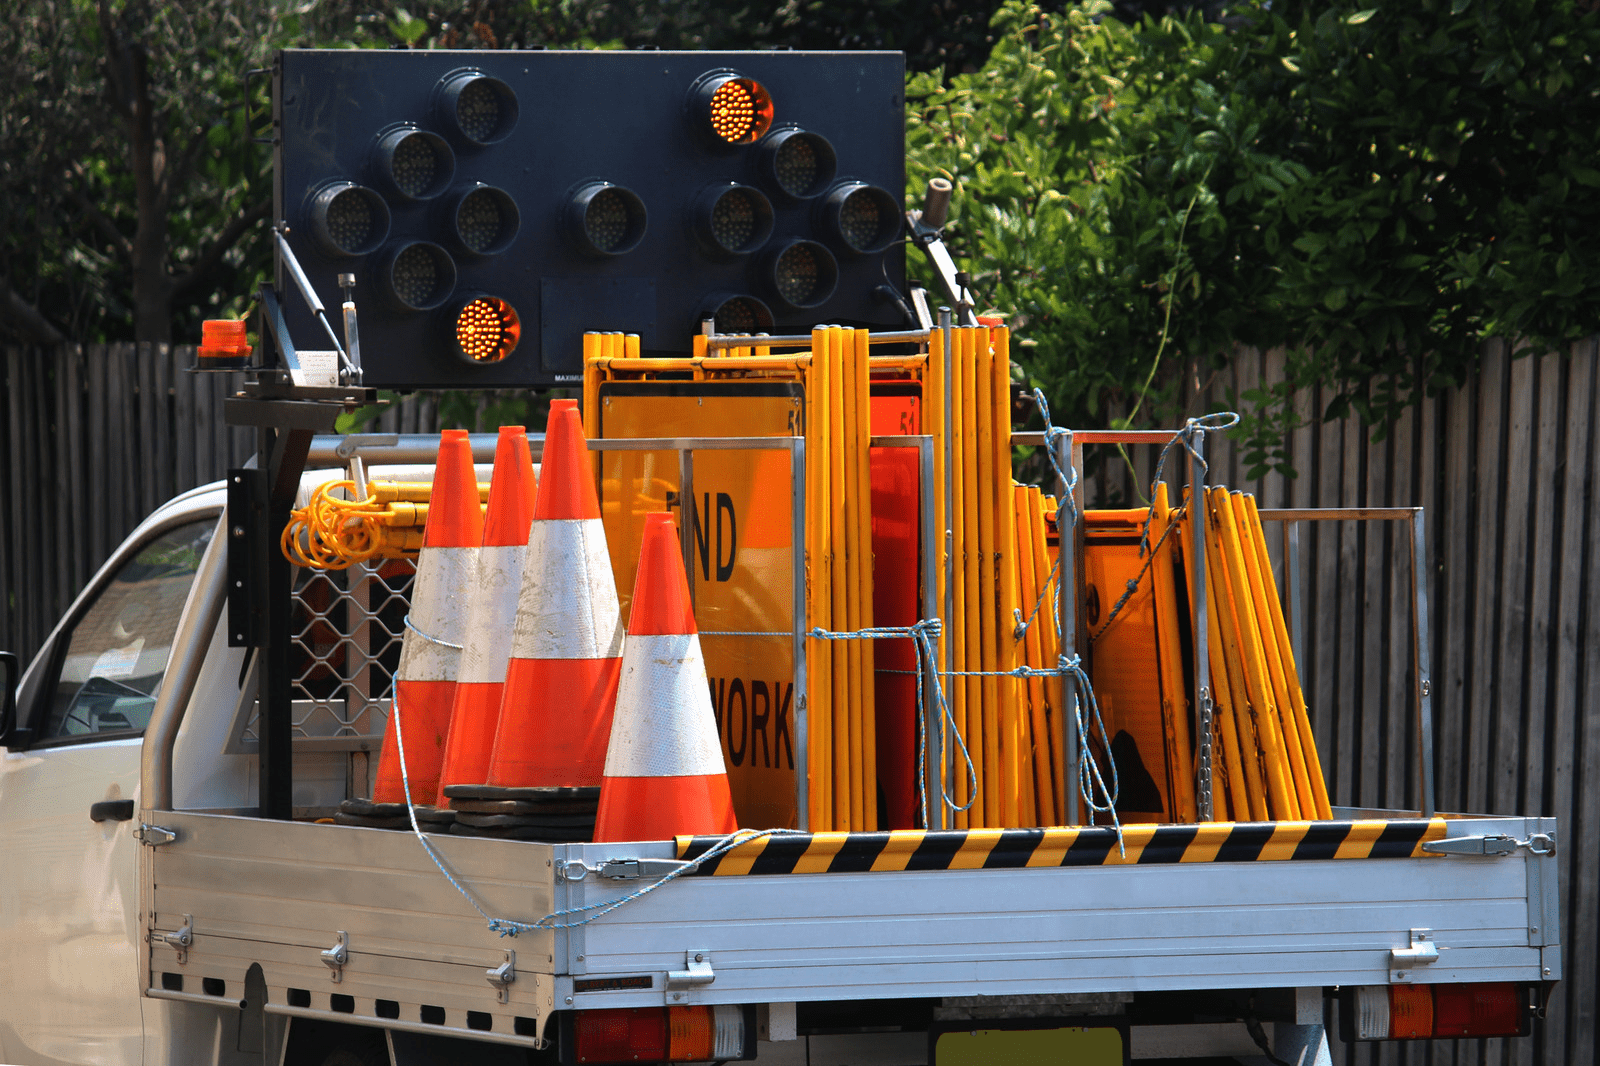 A traffic management truck carrying multiple cones.